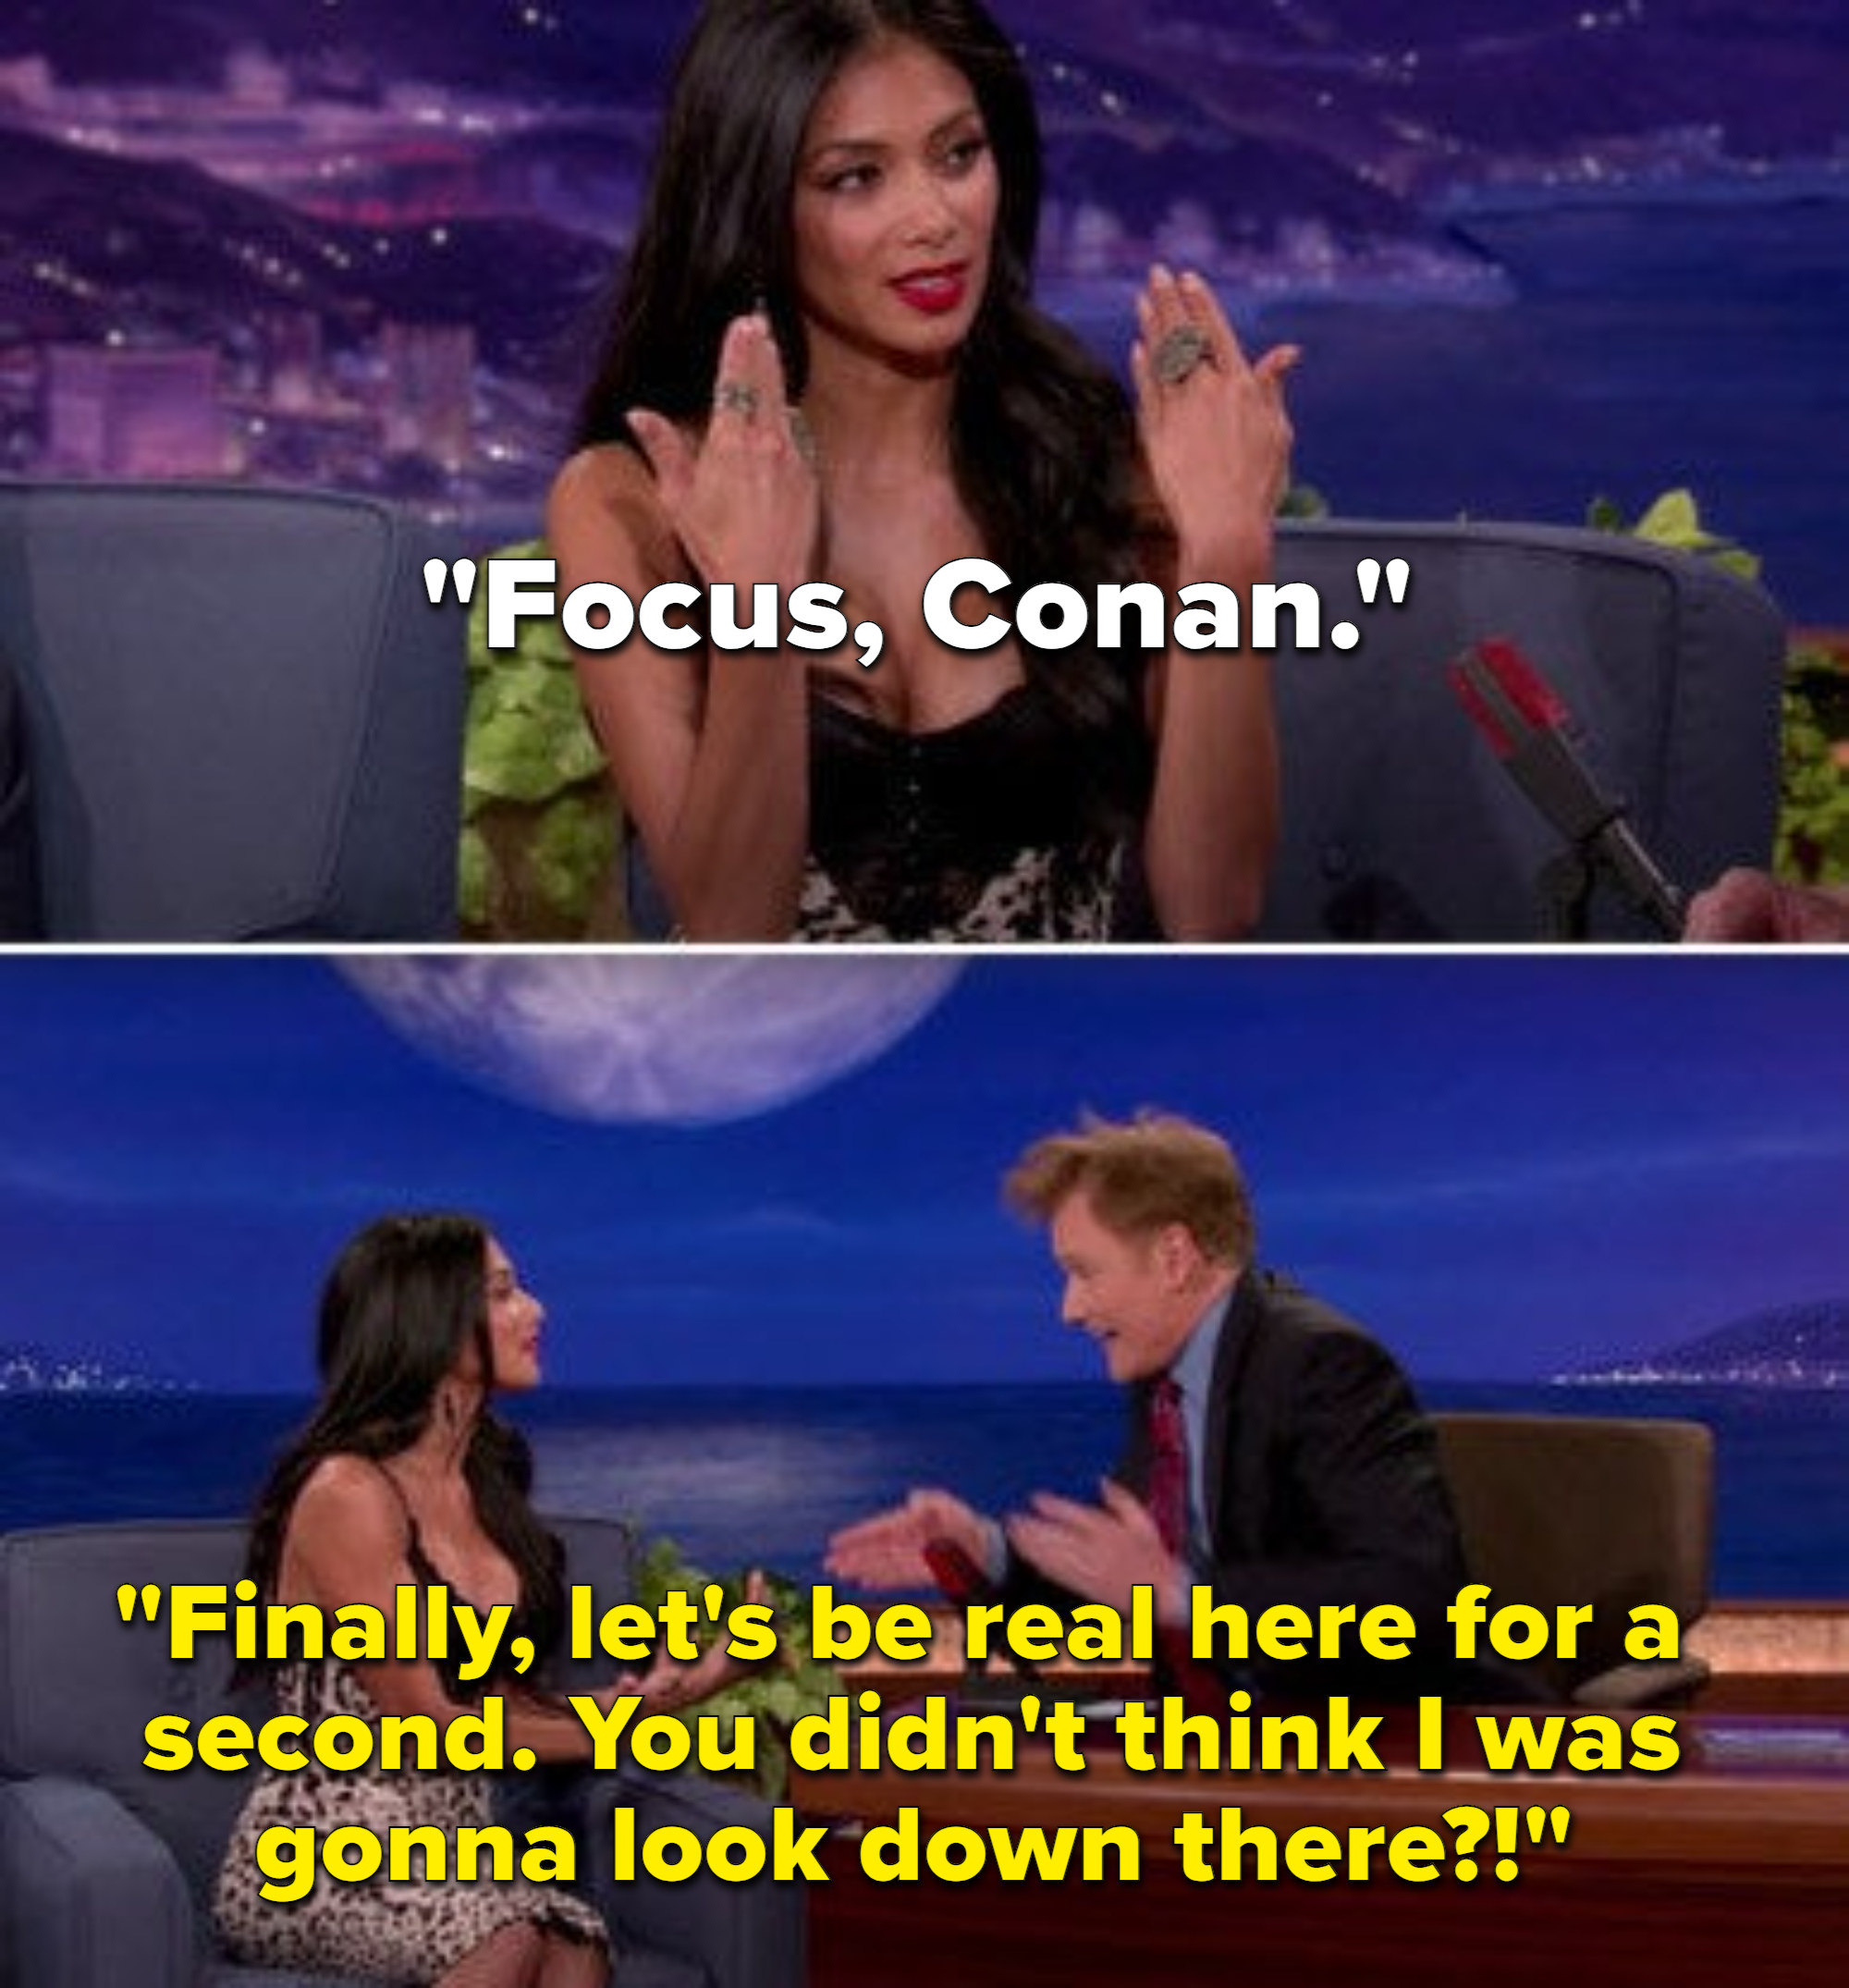 Nicole Scherzinger telling Conan to focus on what she&#x27;s saying and not her chest